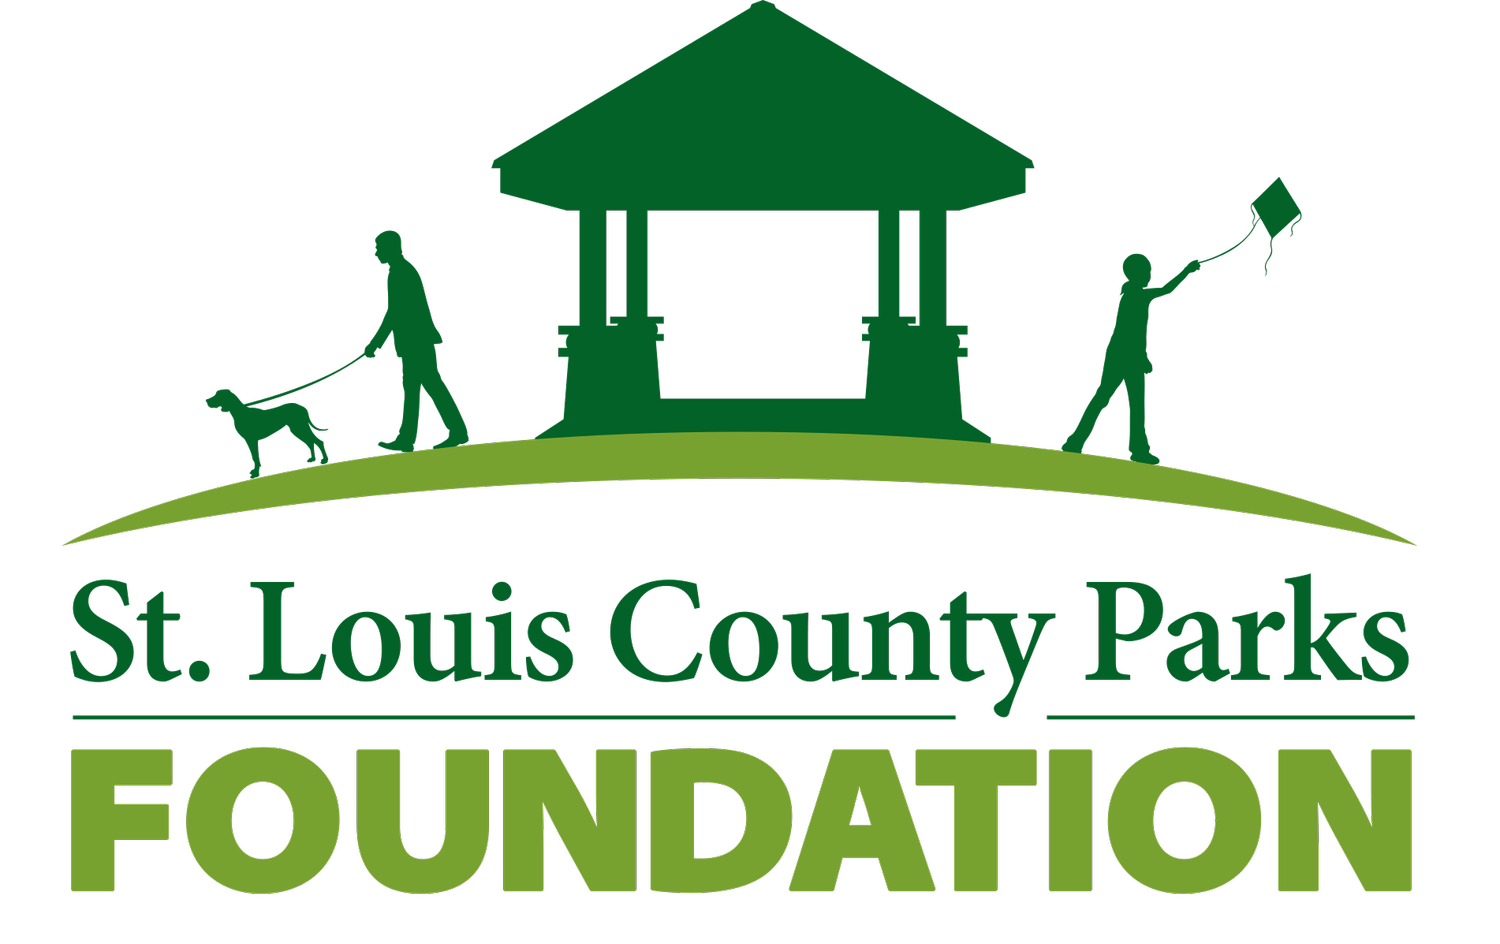 St. Louis County Parks Foundation